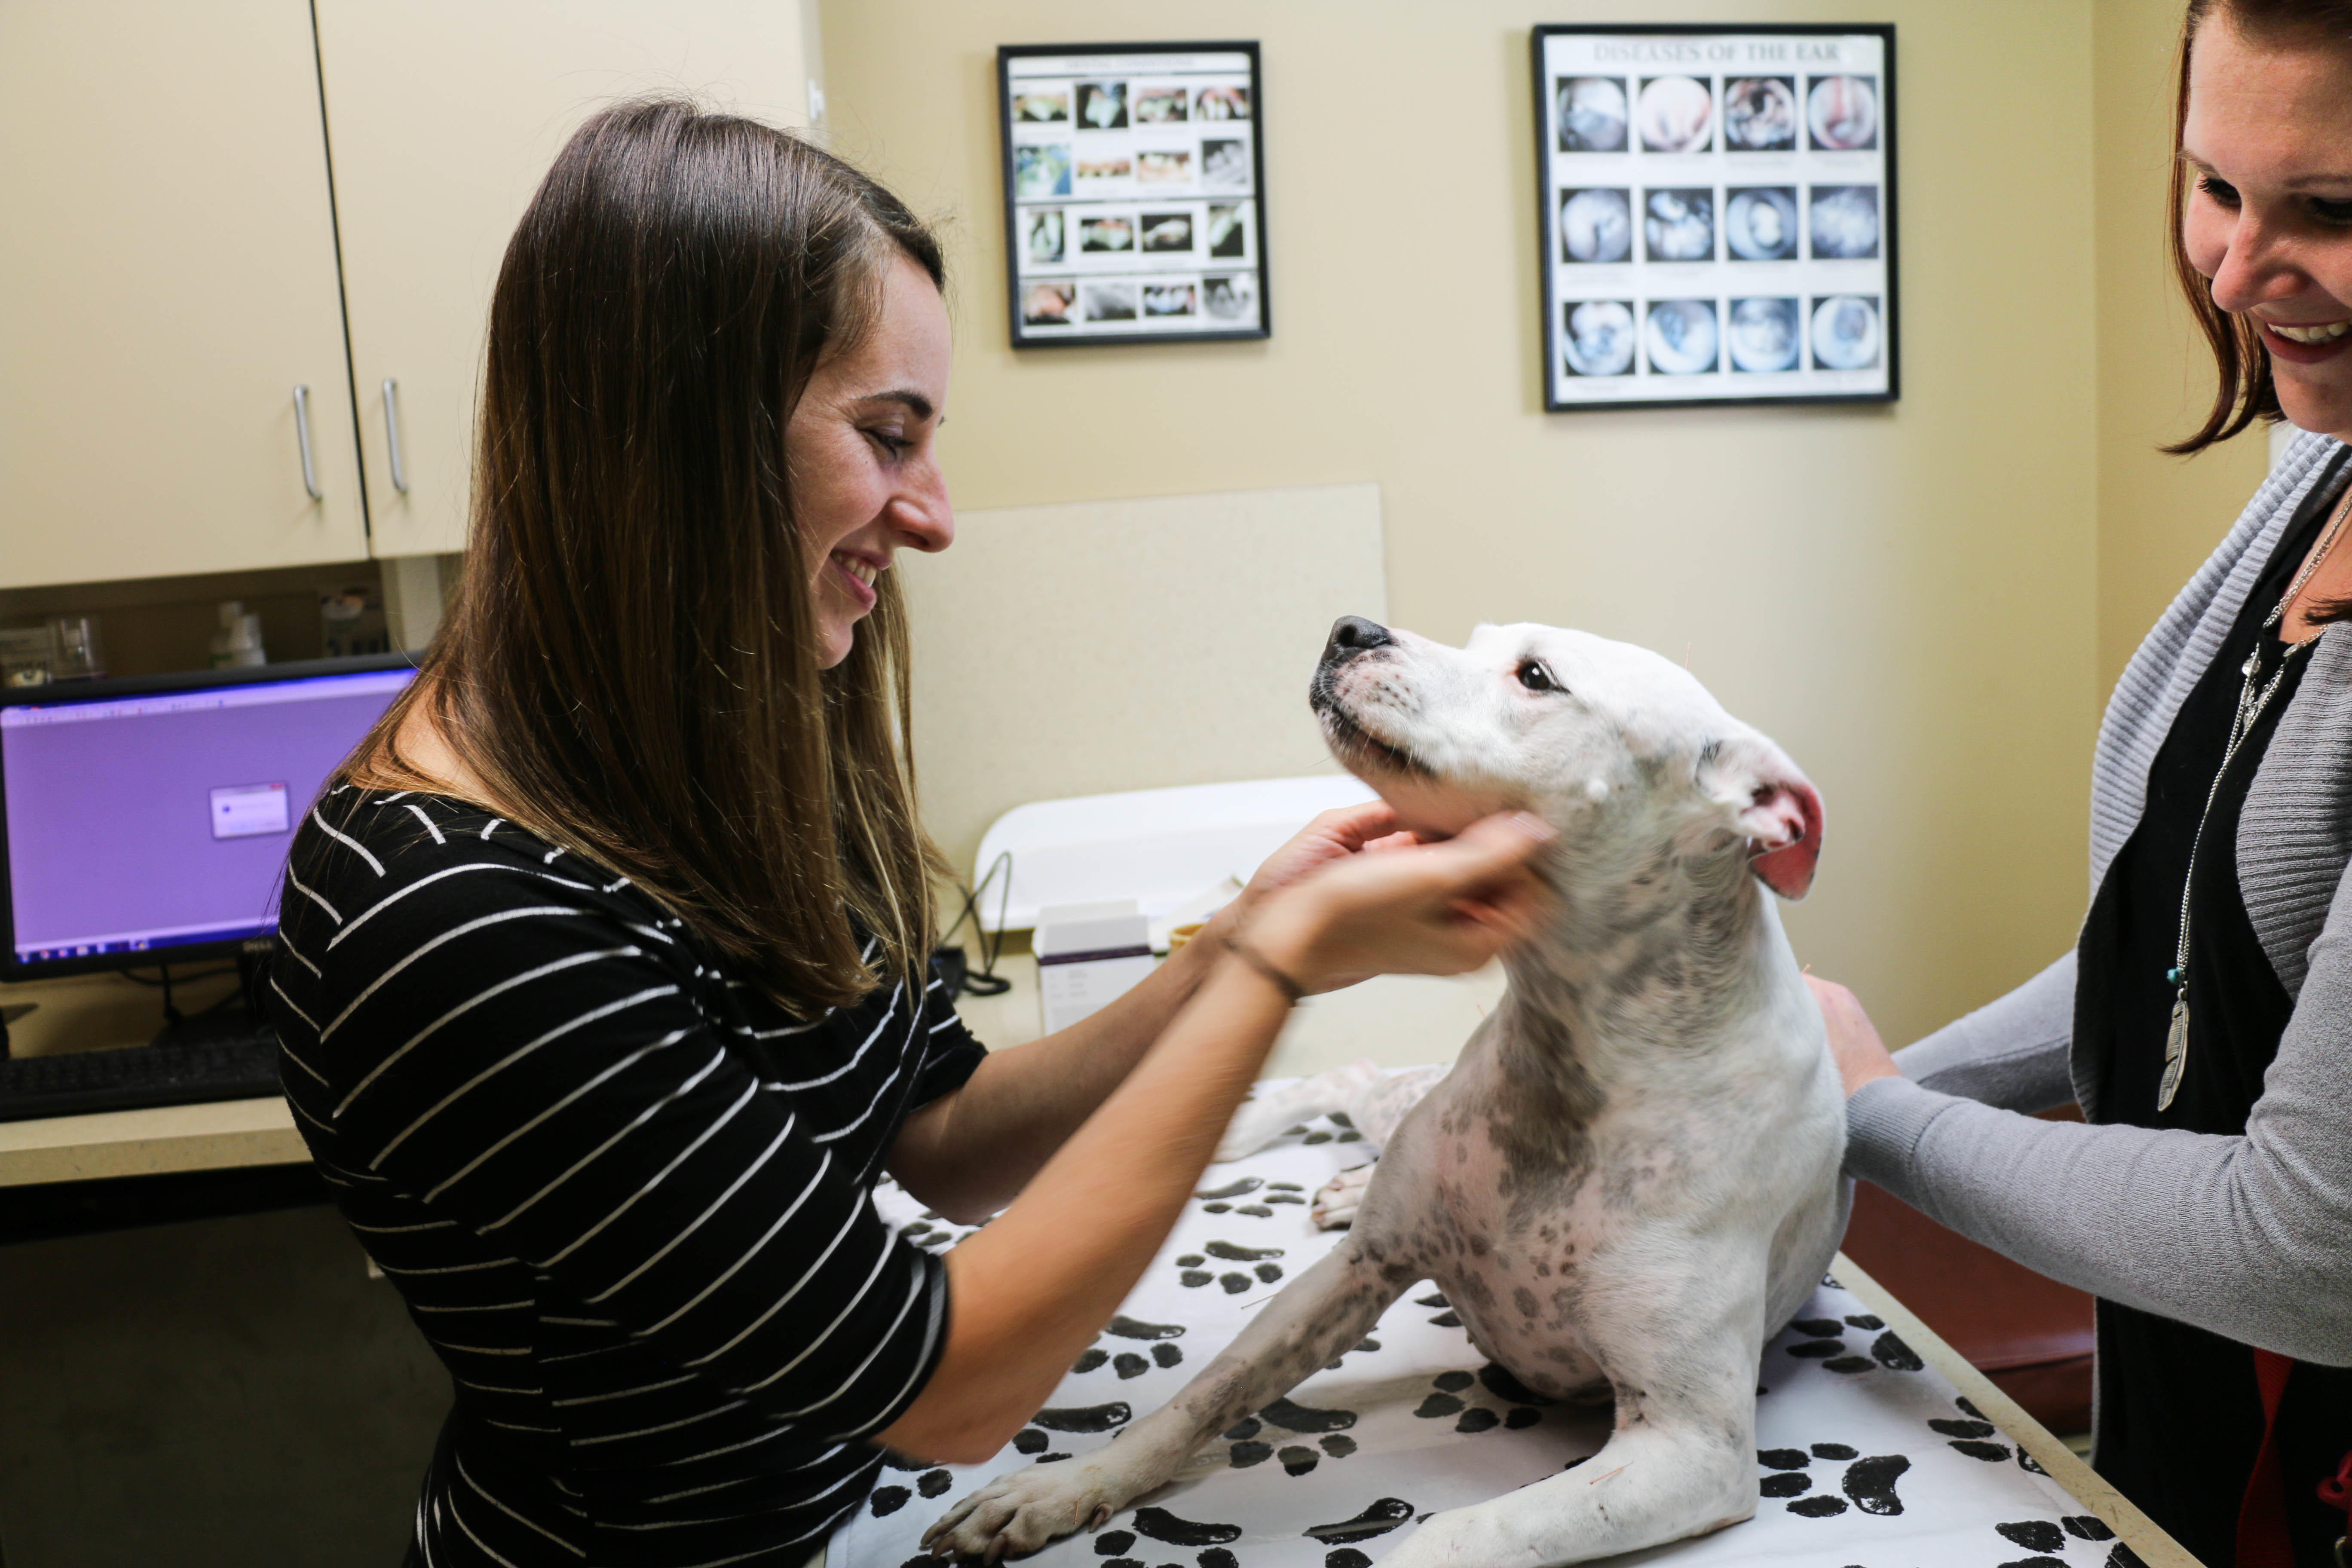 Wellness visits also give pet owners an opportunity to discuss their pet’s health with our experienced veterinarians.